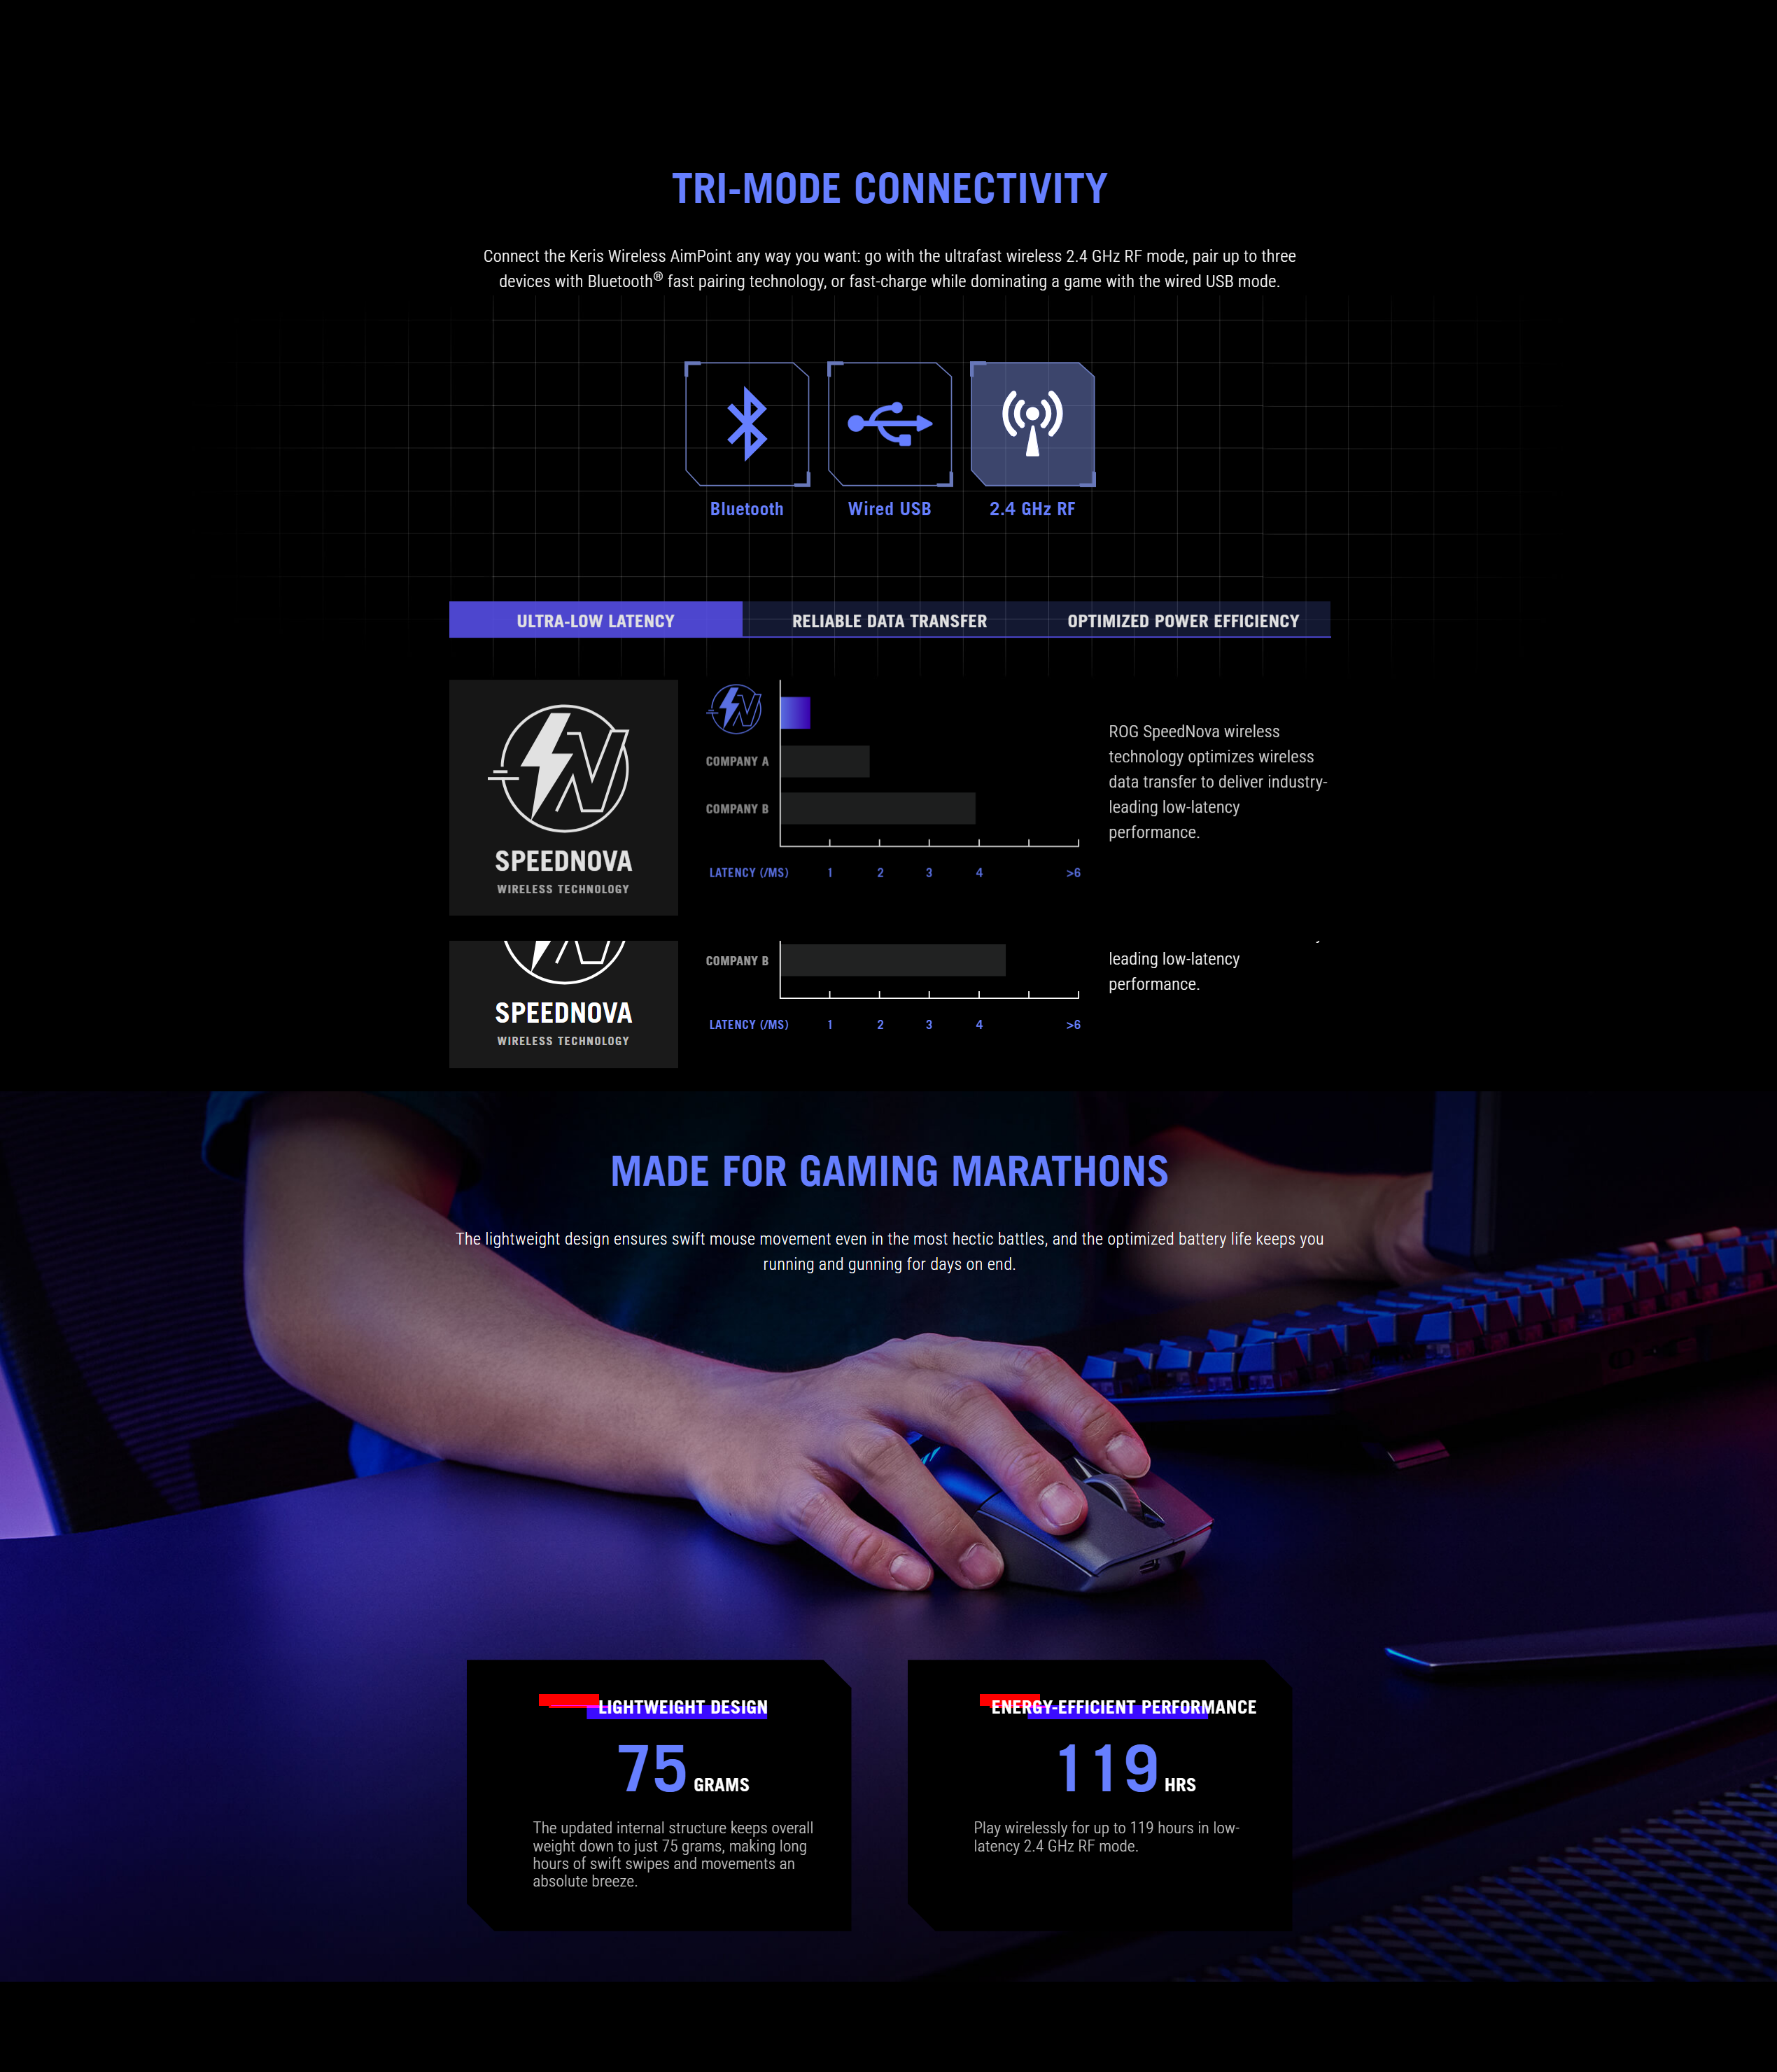 A large marketing image providing additional information about the product ASUS ROG Keris Wireless Aimpoint Gaming Mouse -  Moonlight White - Additional alt info not provided